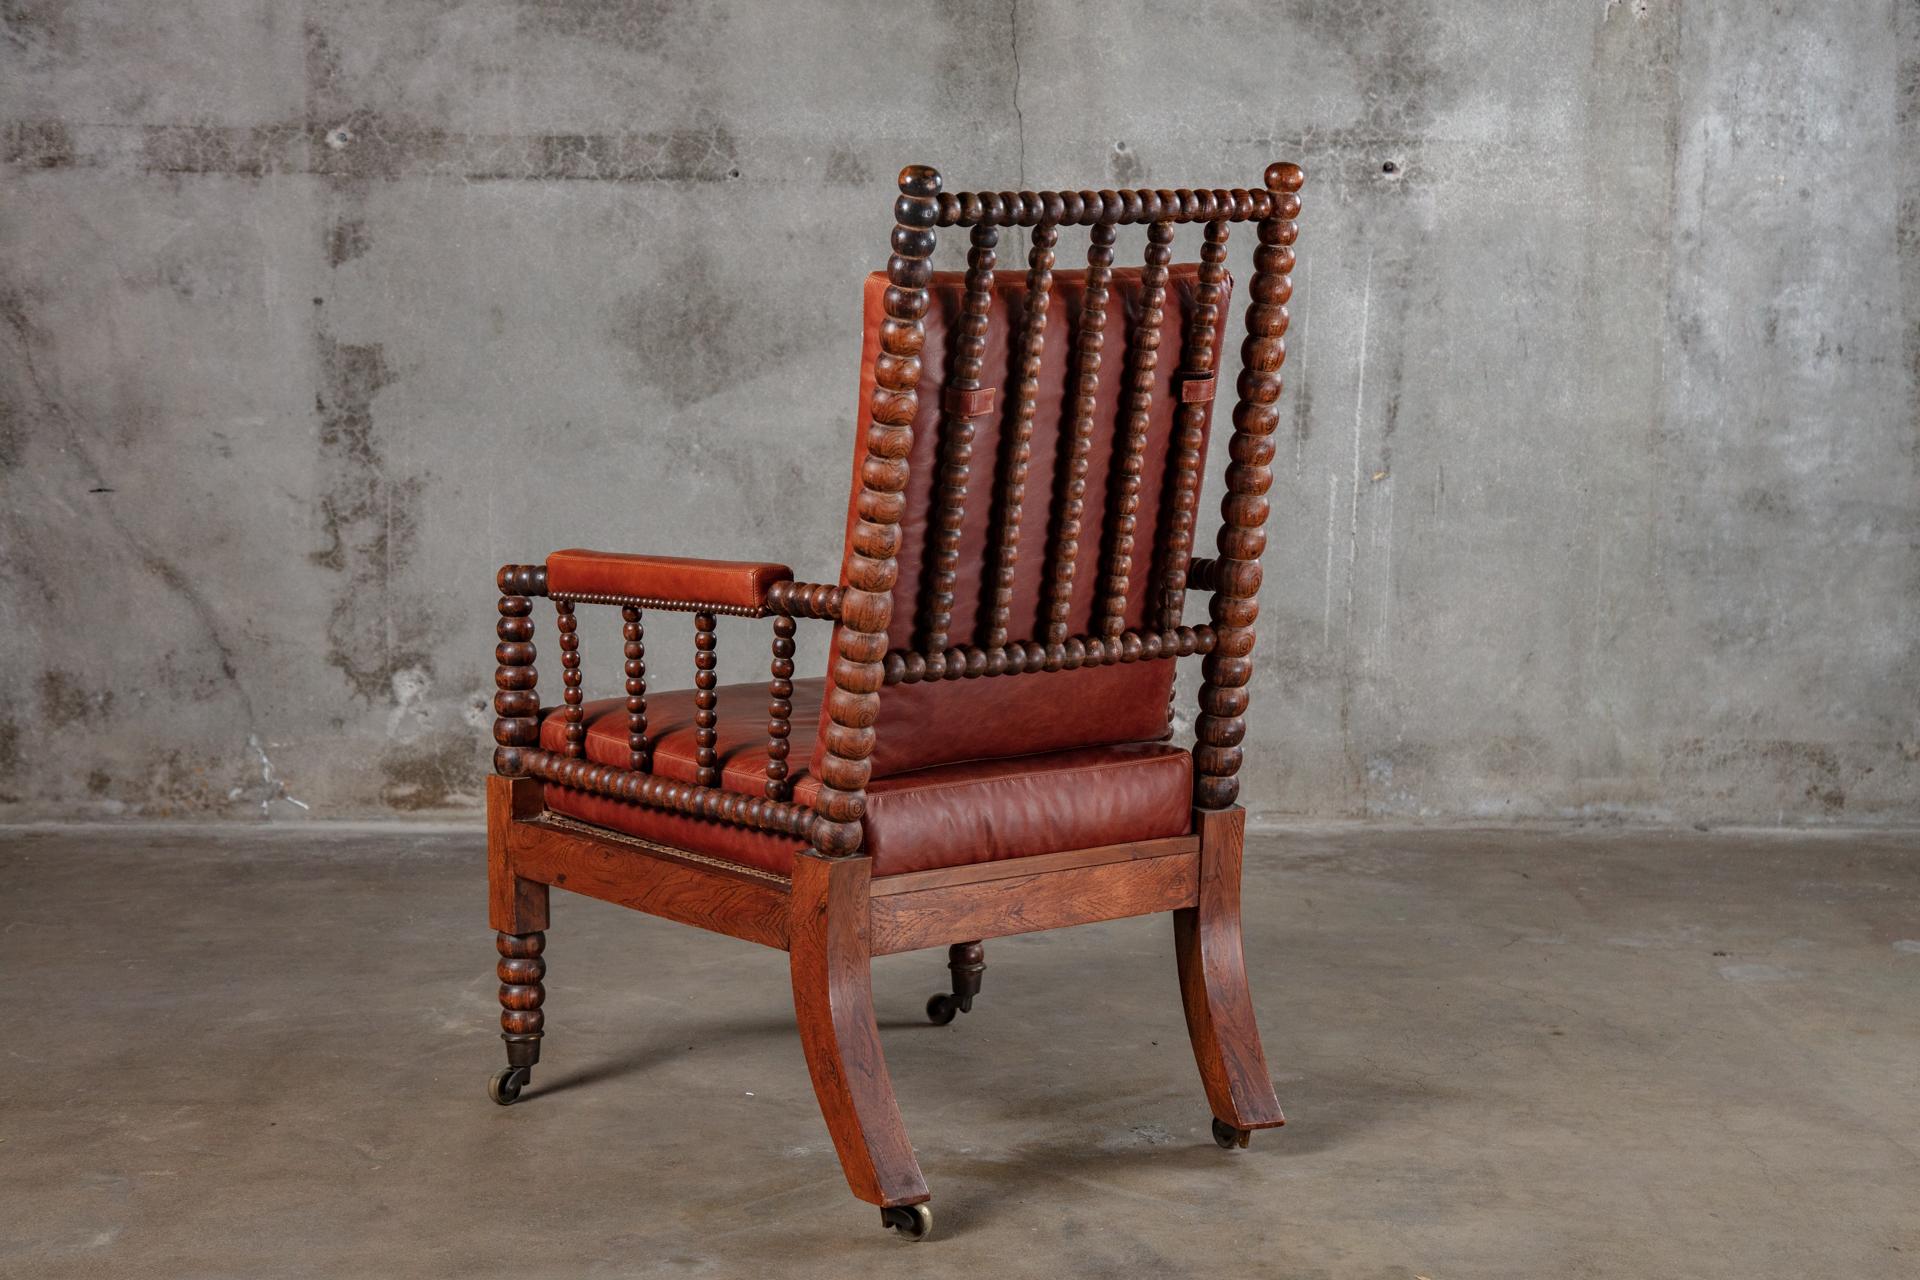 Bobbing turned English rosewood armchair with cane seat, 19th century.